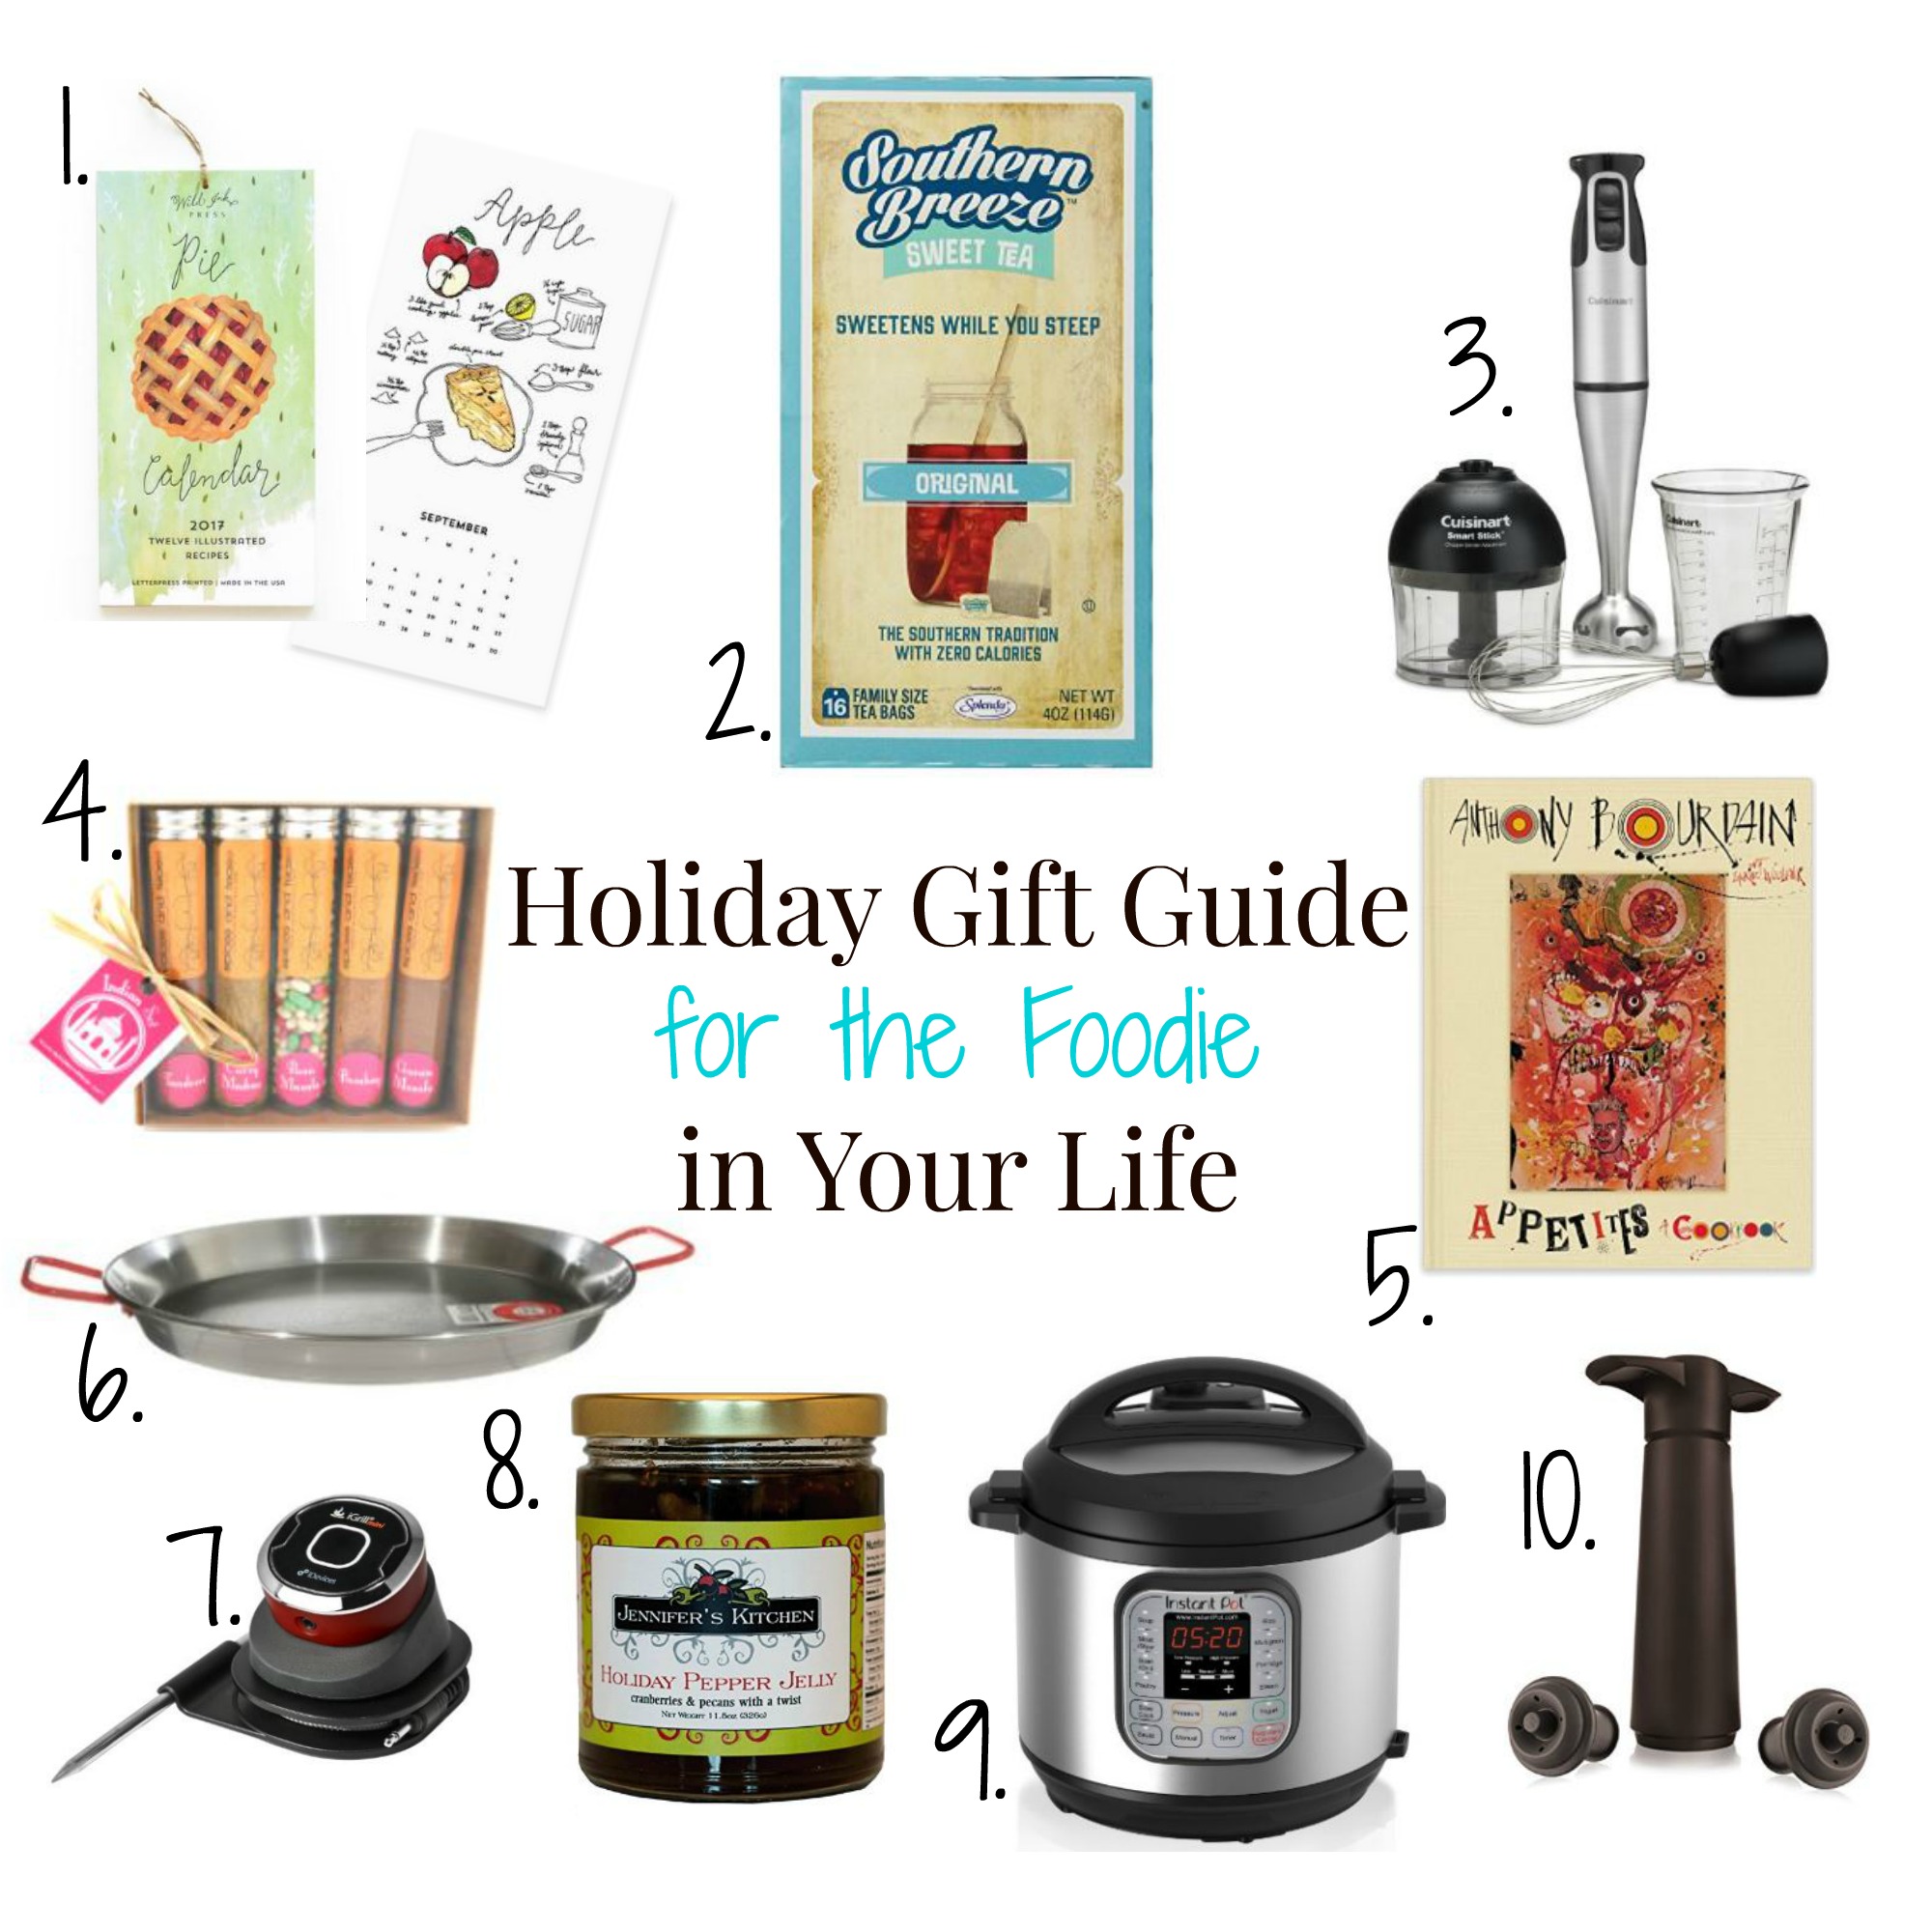 Holiday Gift Guide for the Foodie in Your Life